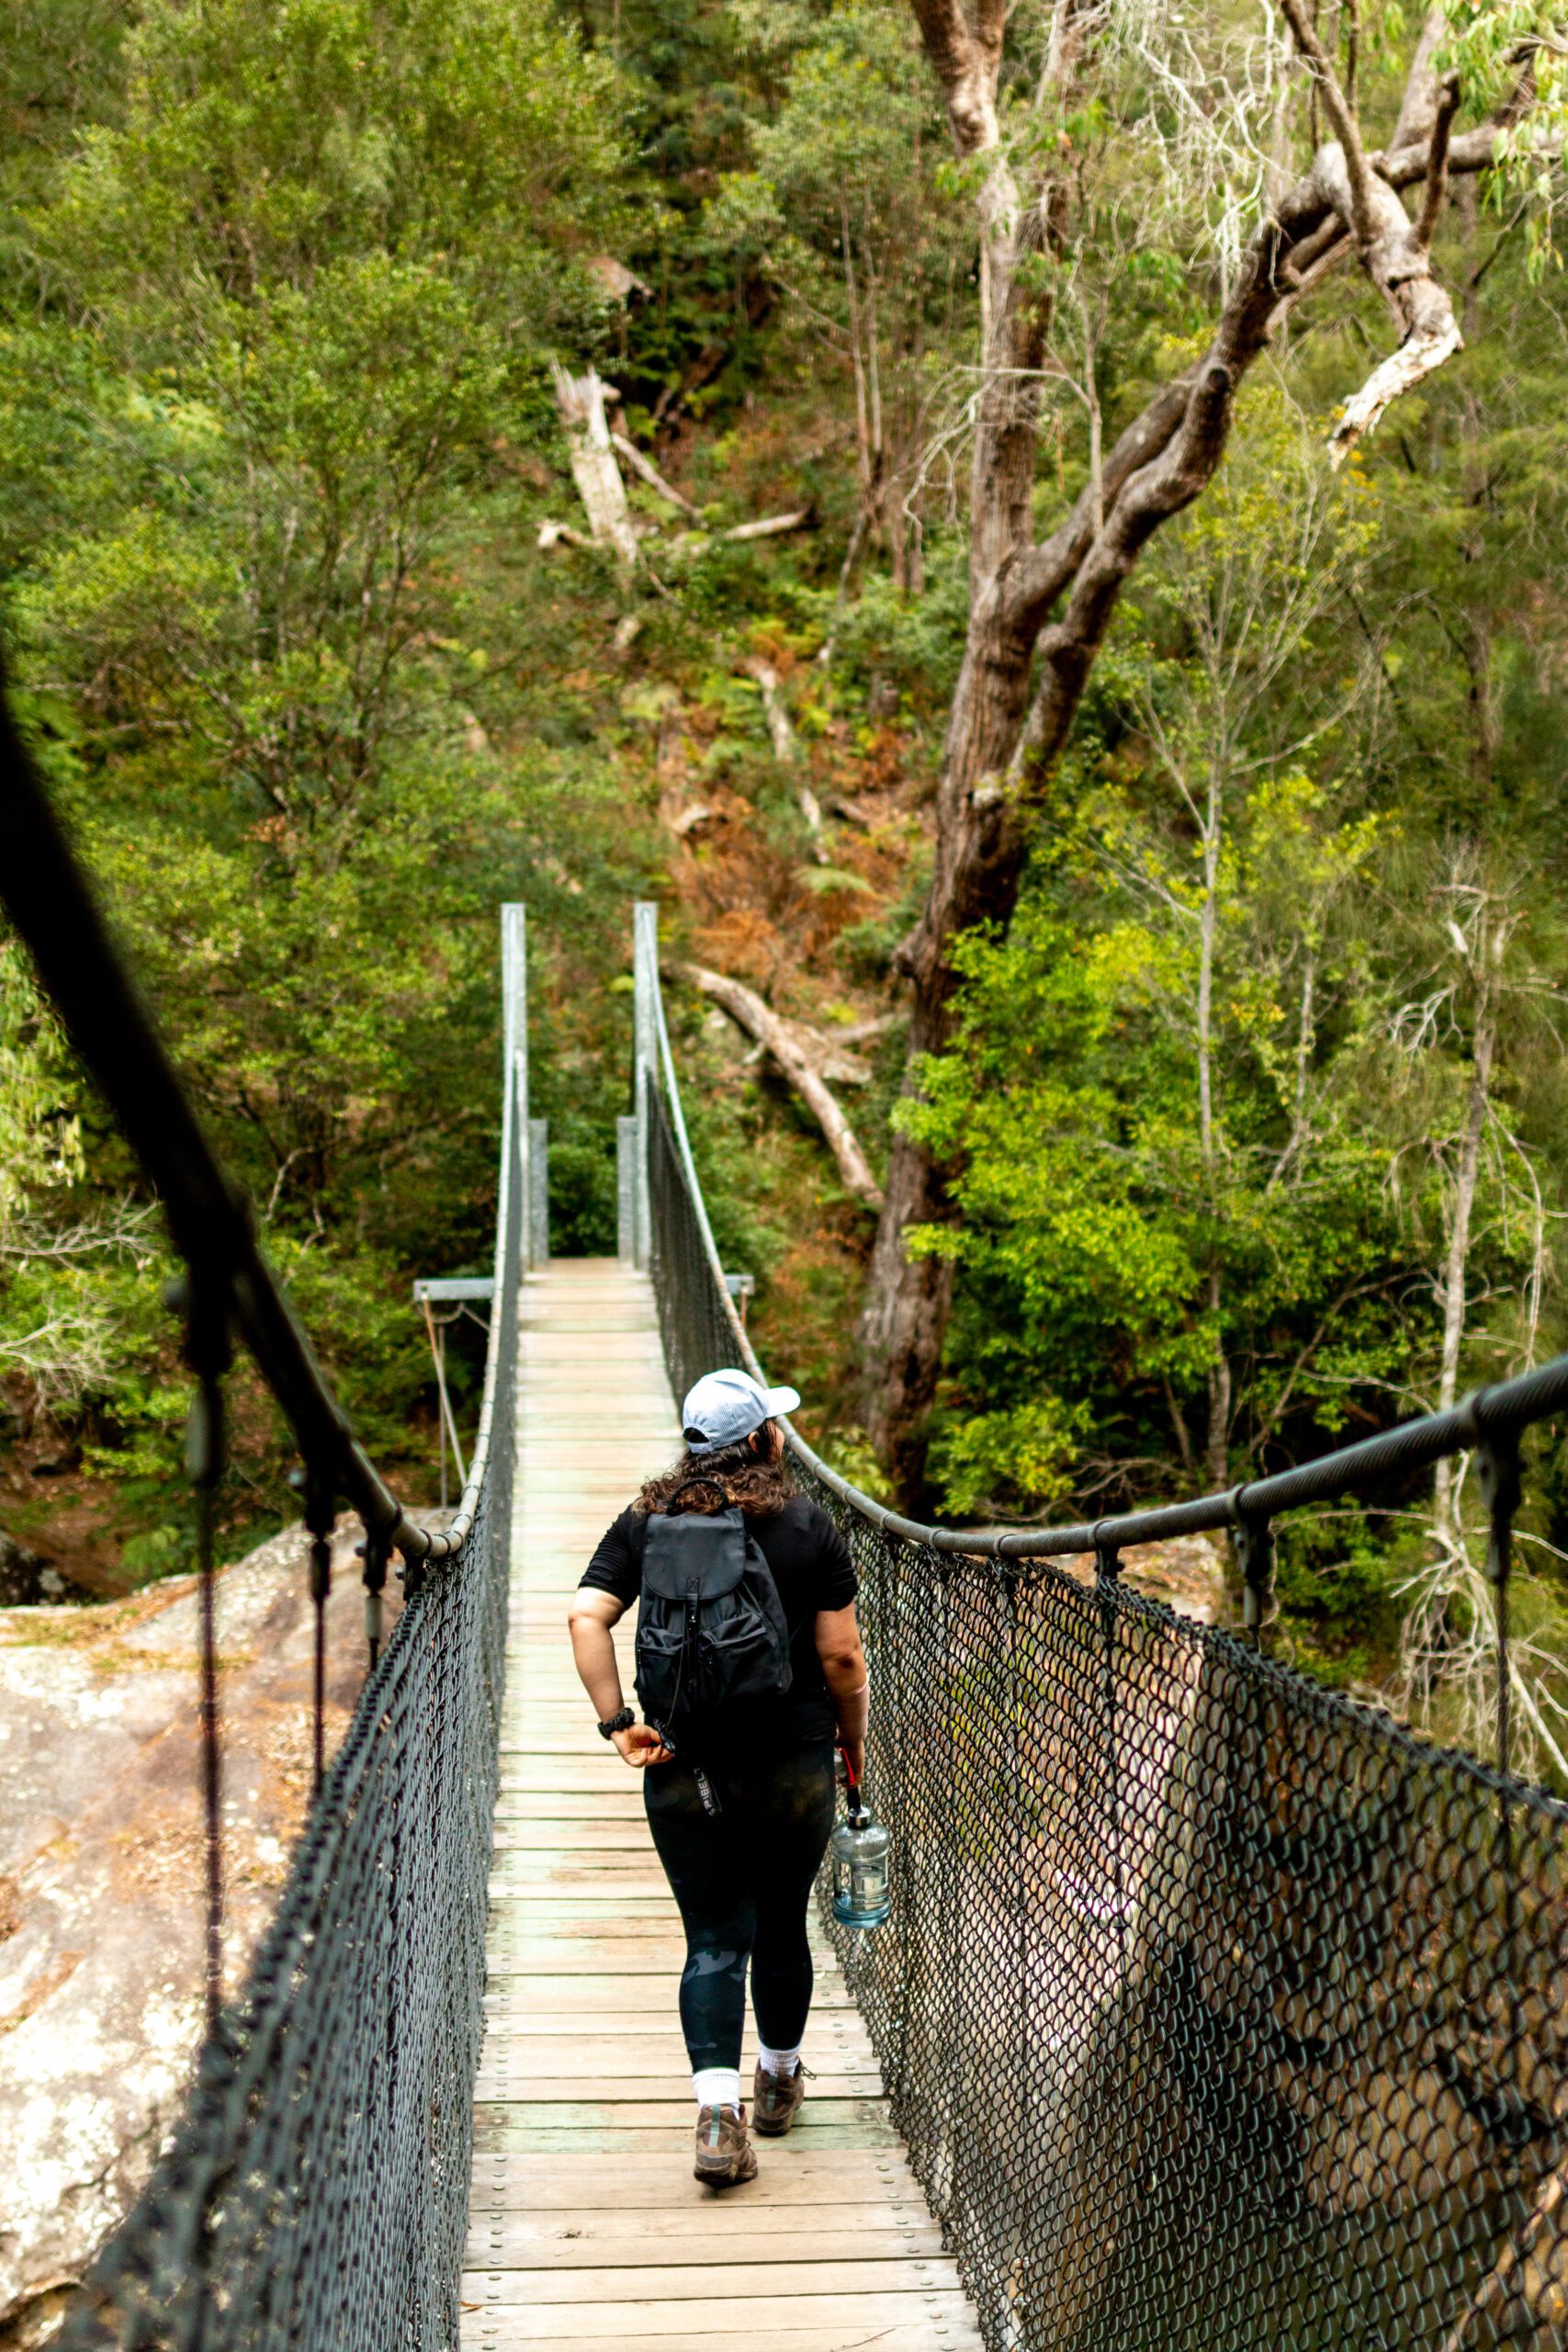 The piles creek look is one of the best hikes central Coast has to offer and features a large swing bridge